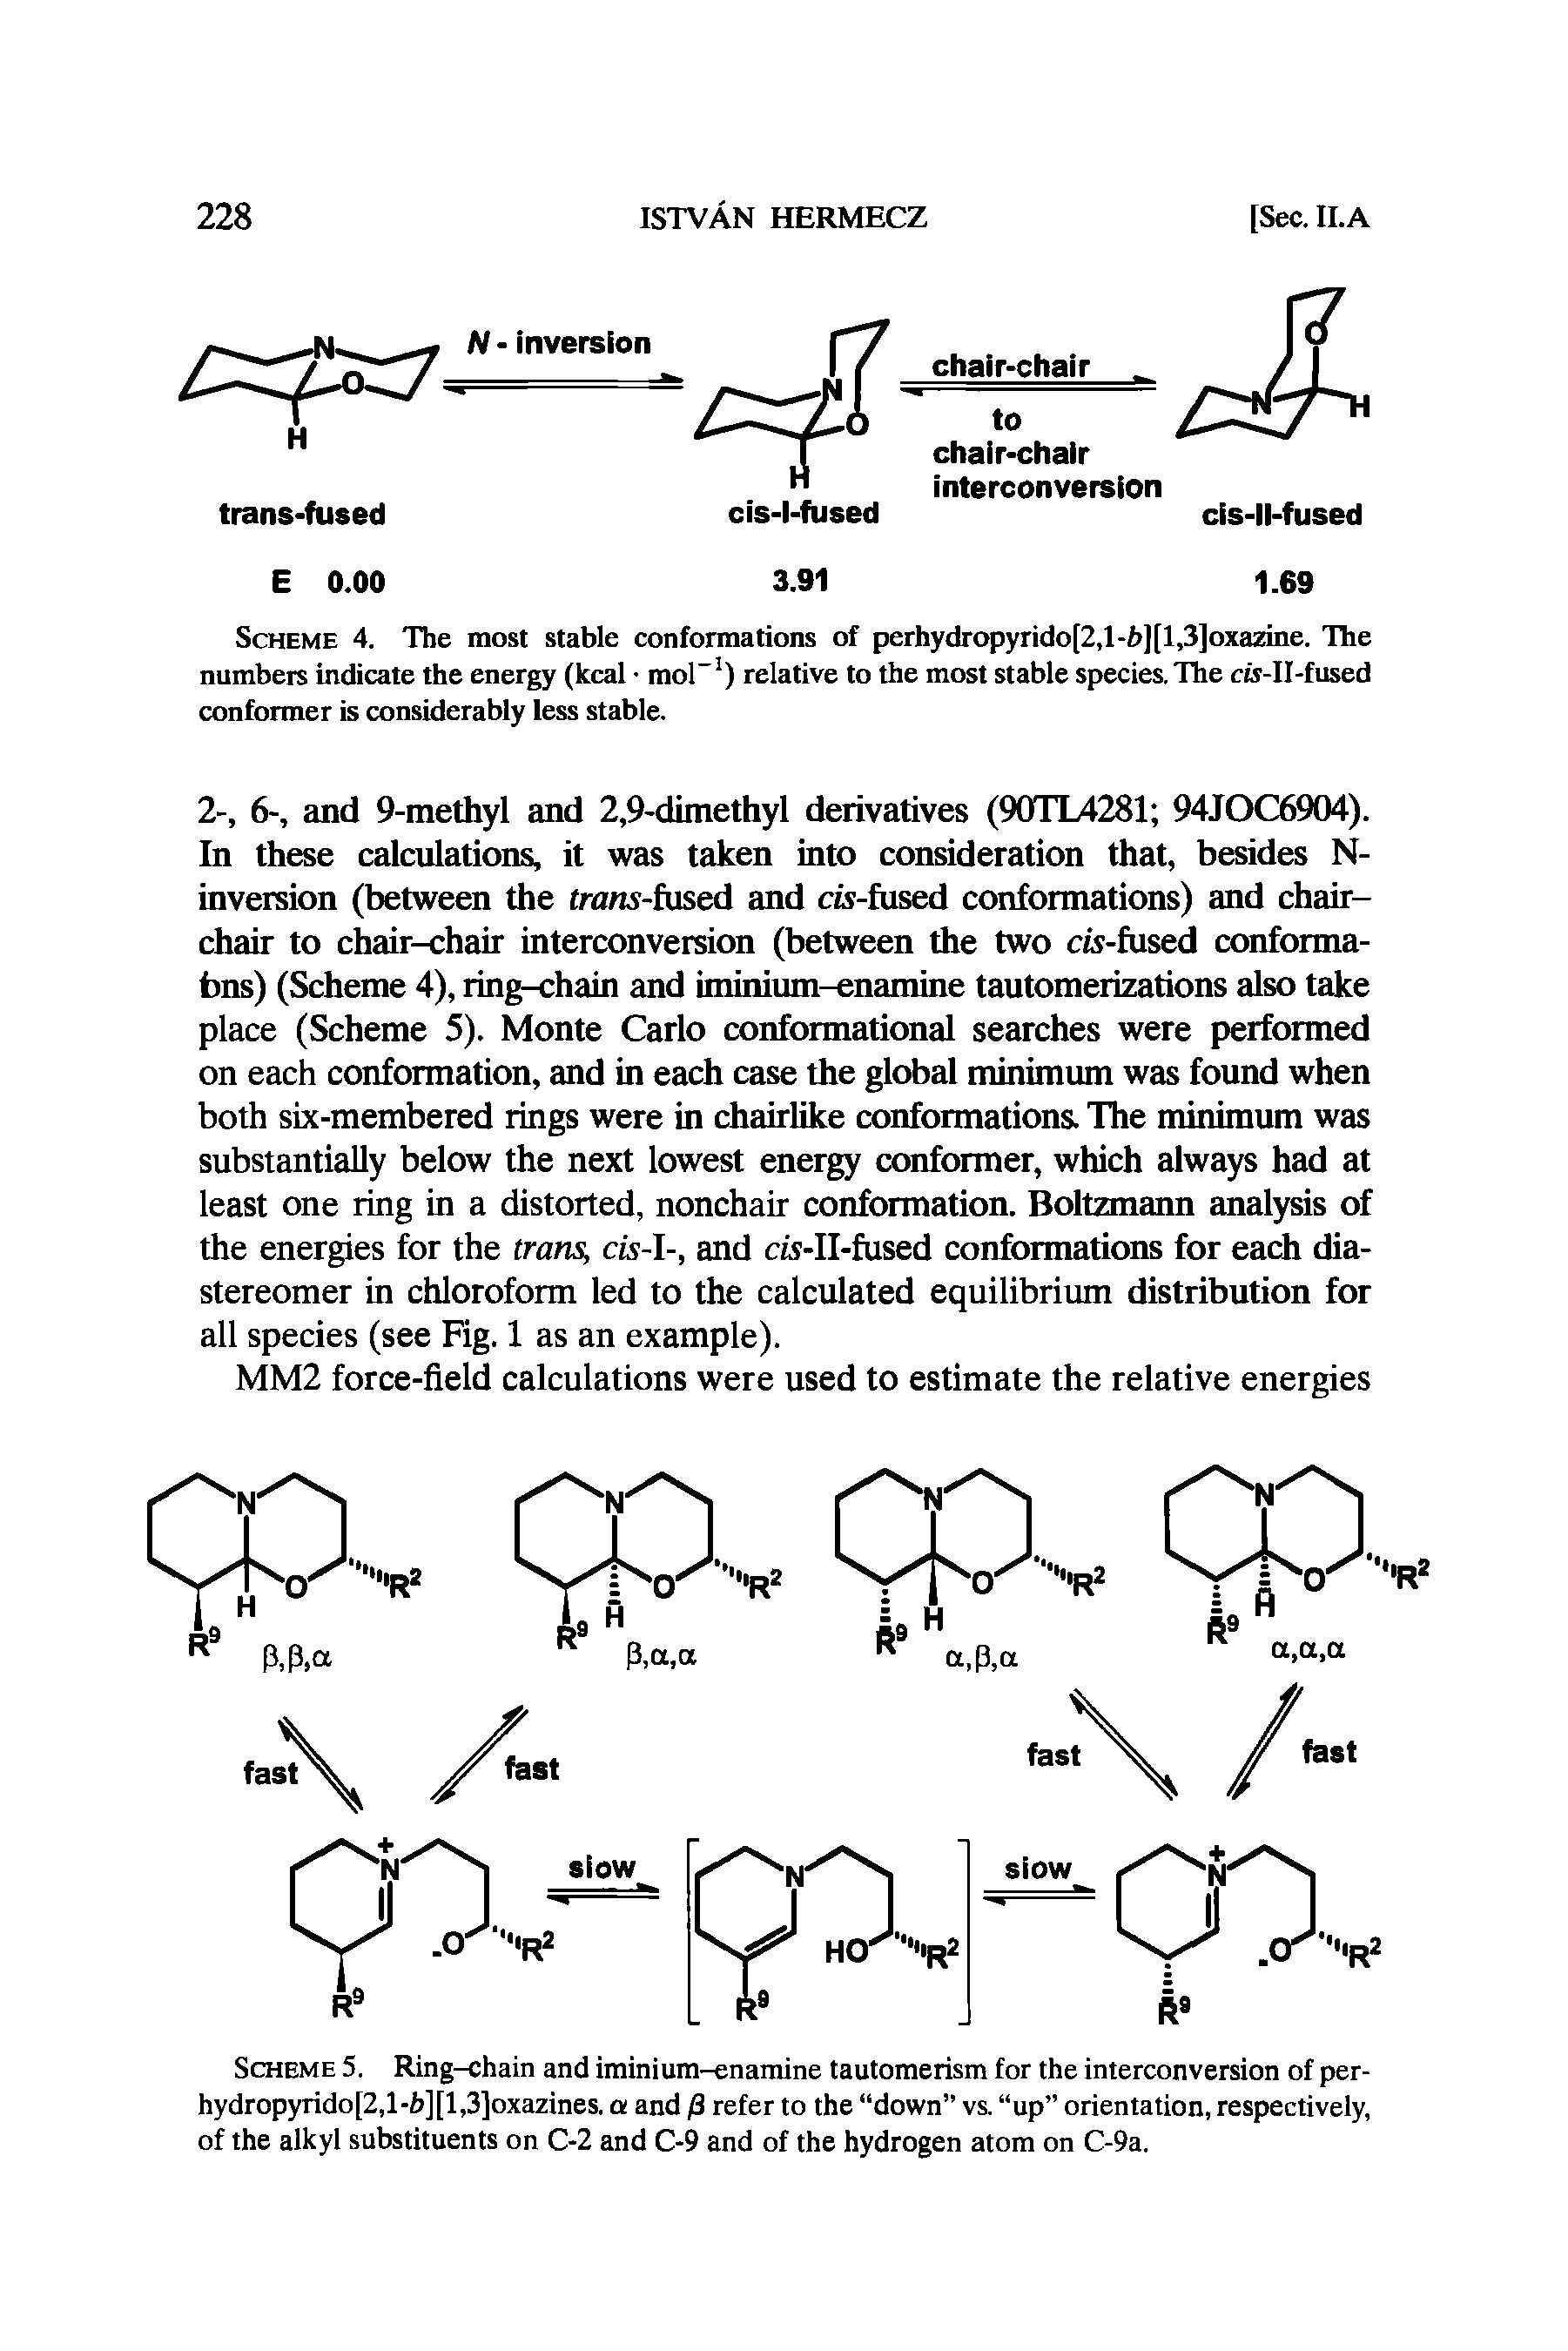 Scheme 5. Ring-chain and iminium-enamine tautomerism for the interconversion of per-hydropyrido[2,l-b][l,3]oxazines. a and /3 refer to the down vs. up orientation, respectively, of the alkyl substituents on C-2 and C-9 and of the hydrogen atom on C-9a.